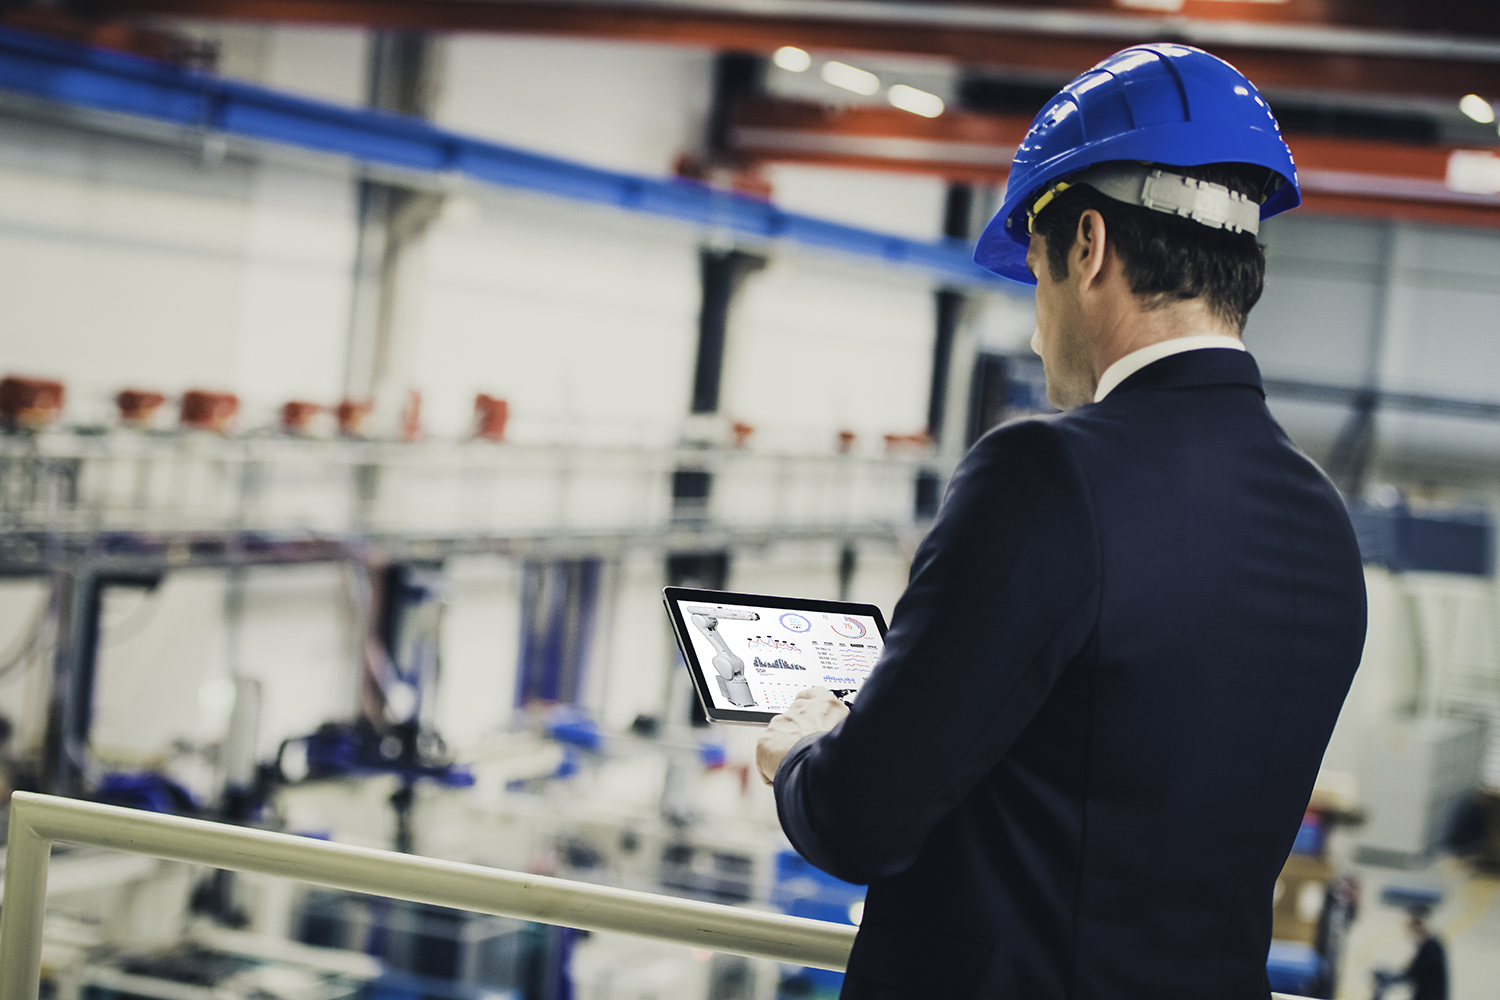 AI-based monitoring of the robot’s main components can give engineers the information they need to modify the robot’s operation to extend the lifecycle, as well as enabling predictive maintenance to reduce both planned and unplanned downtime.